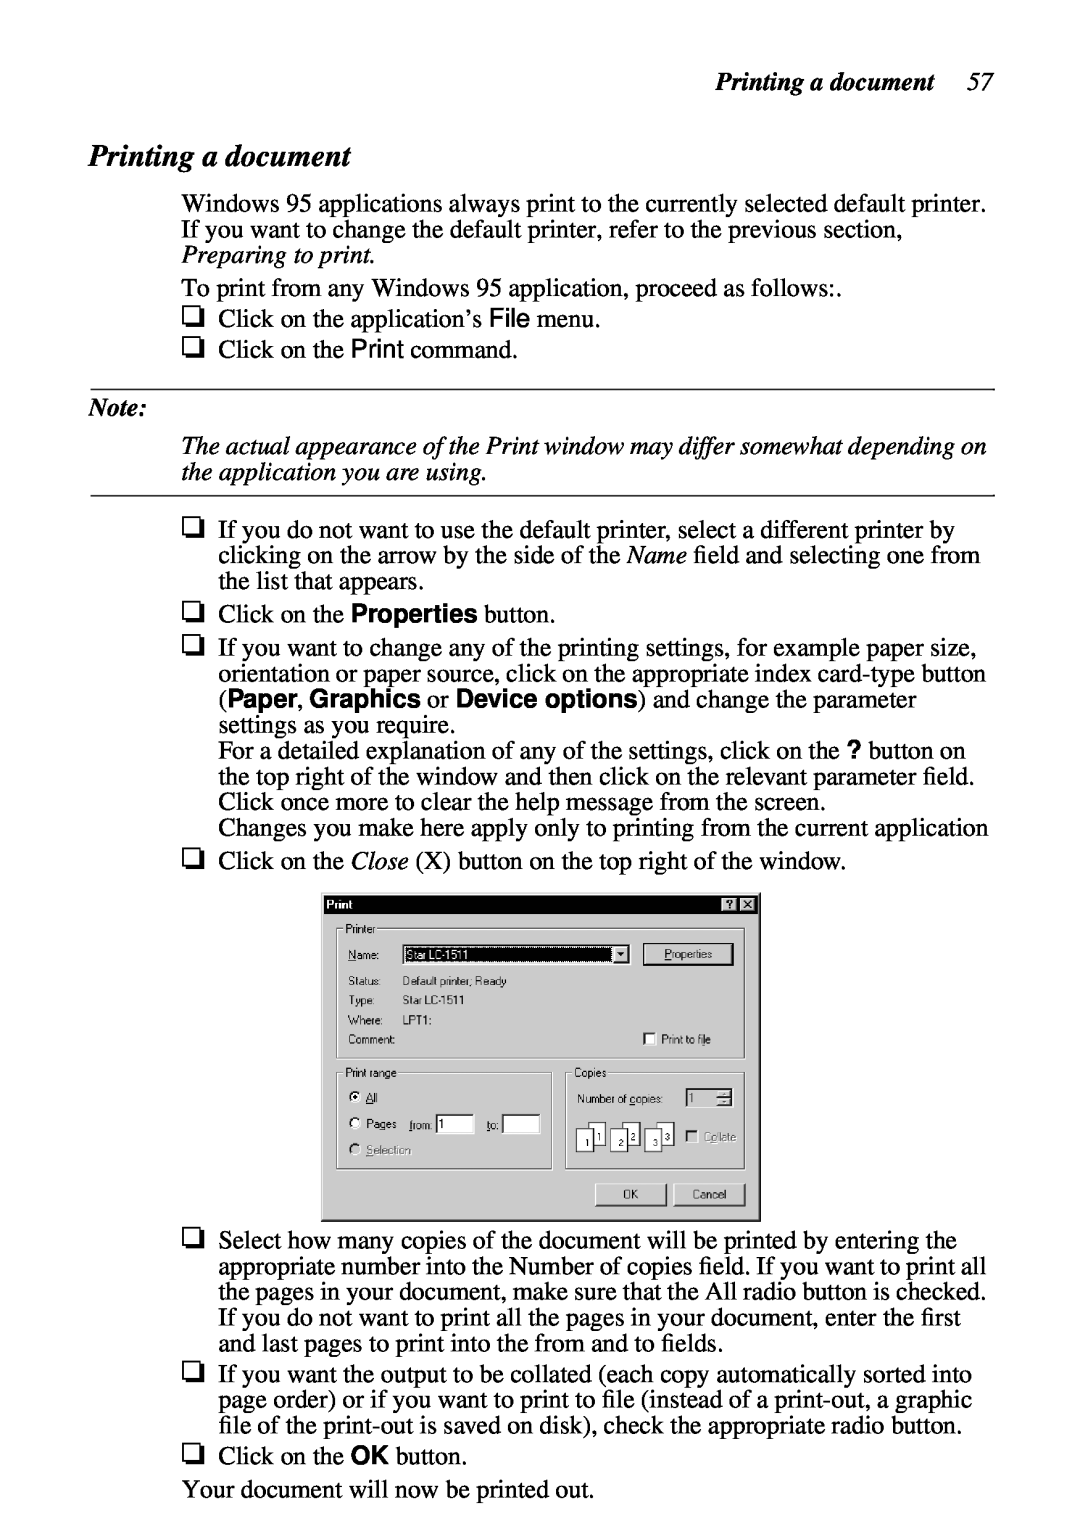 Star Micronics LC-1511, LC-1521 Printing a document, To print from any Windows 95 application, proceed as follows 